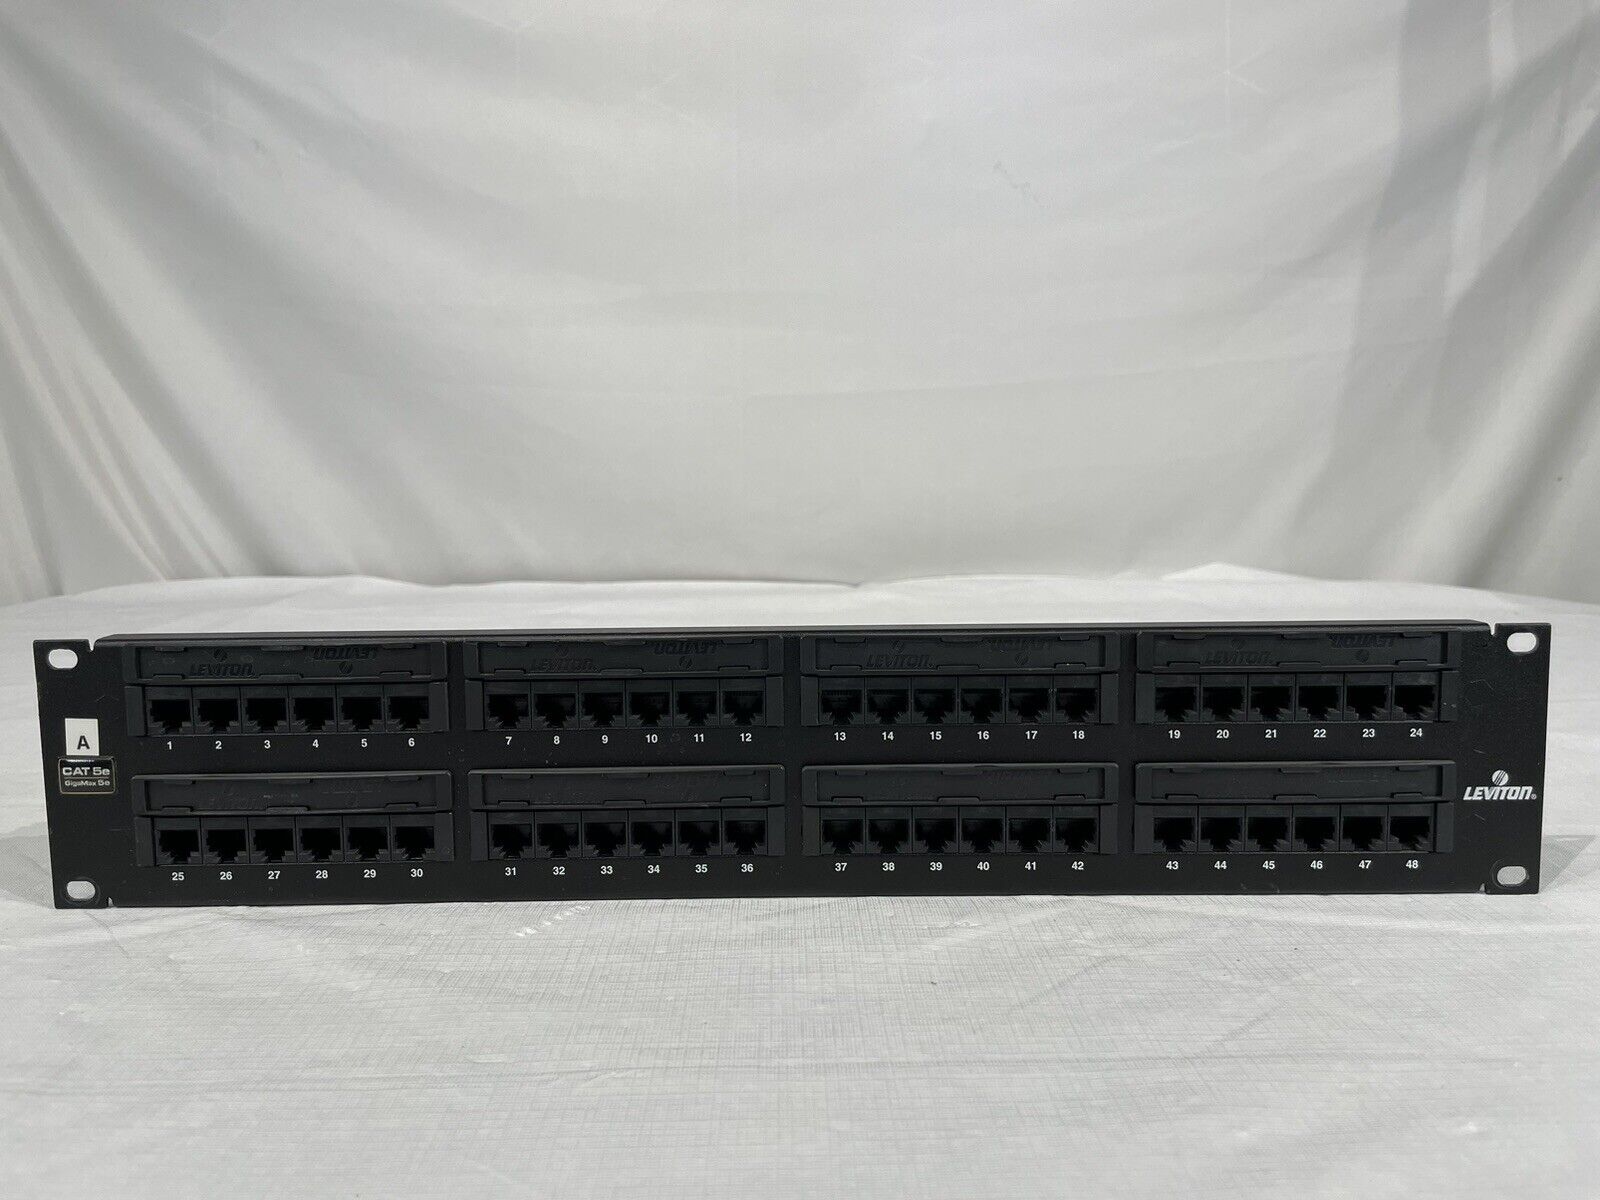 Leviton T568B Gigamax 5e Cat5 48-Port Ethernet Patch Panel